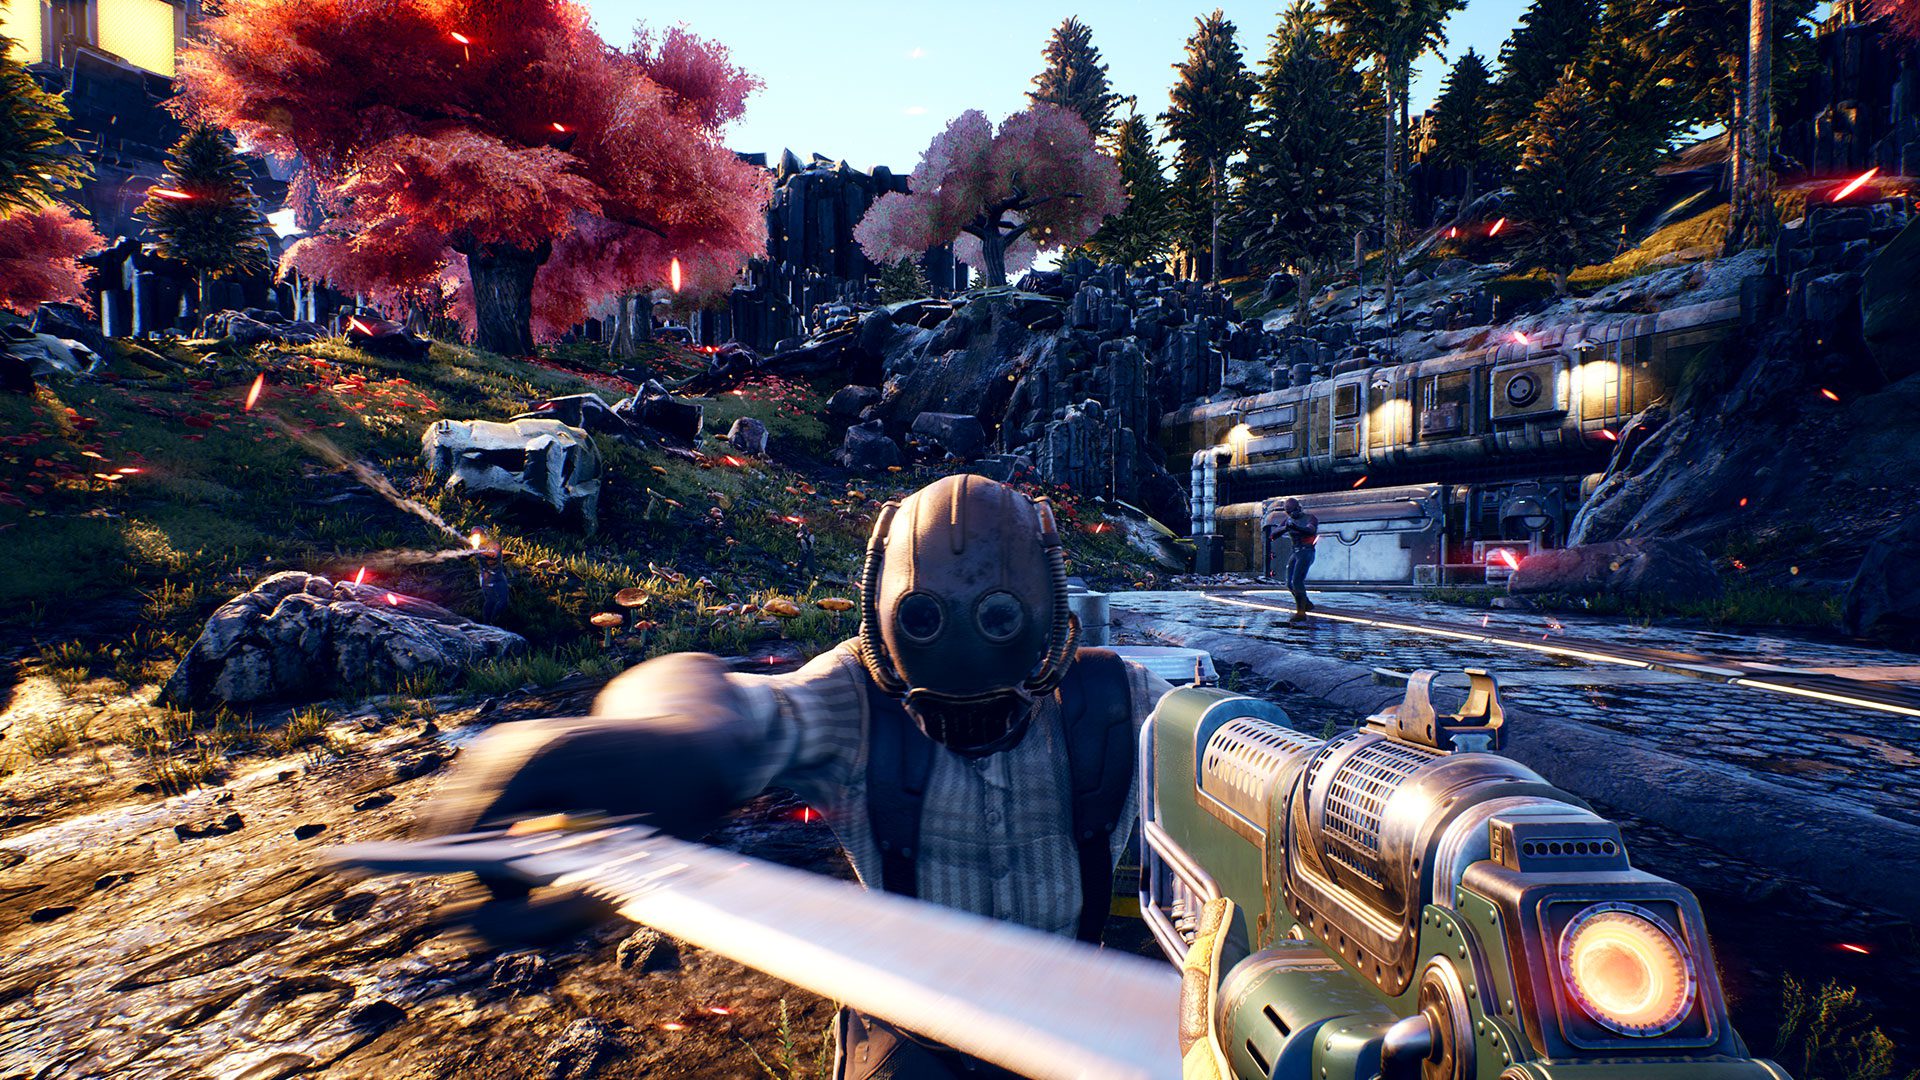 Original creators of Fallout & New Vegas working on new shooter-RPG ‘The Outer Worlds’